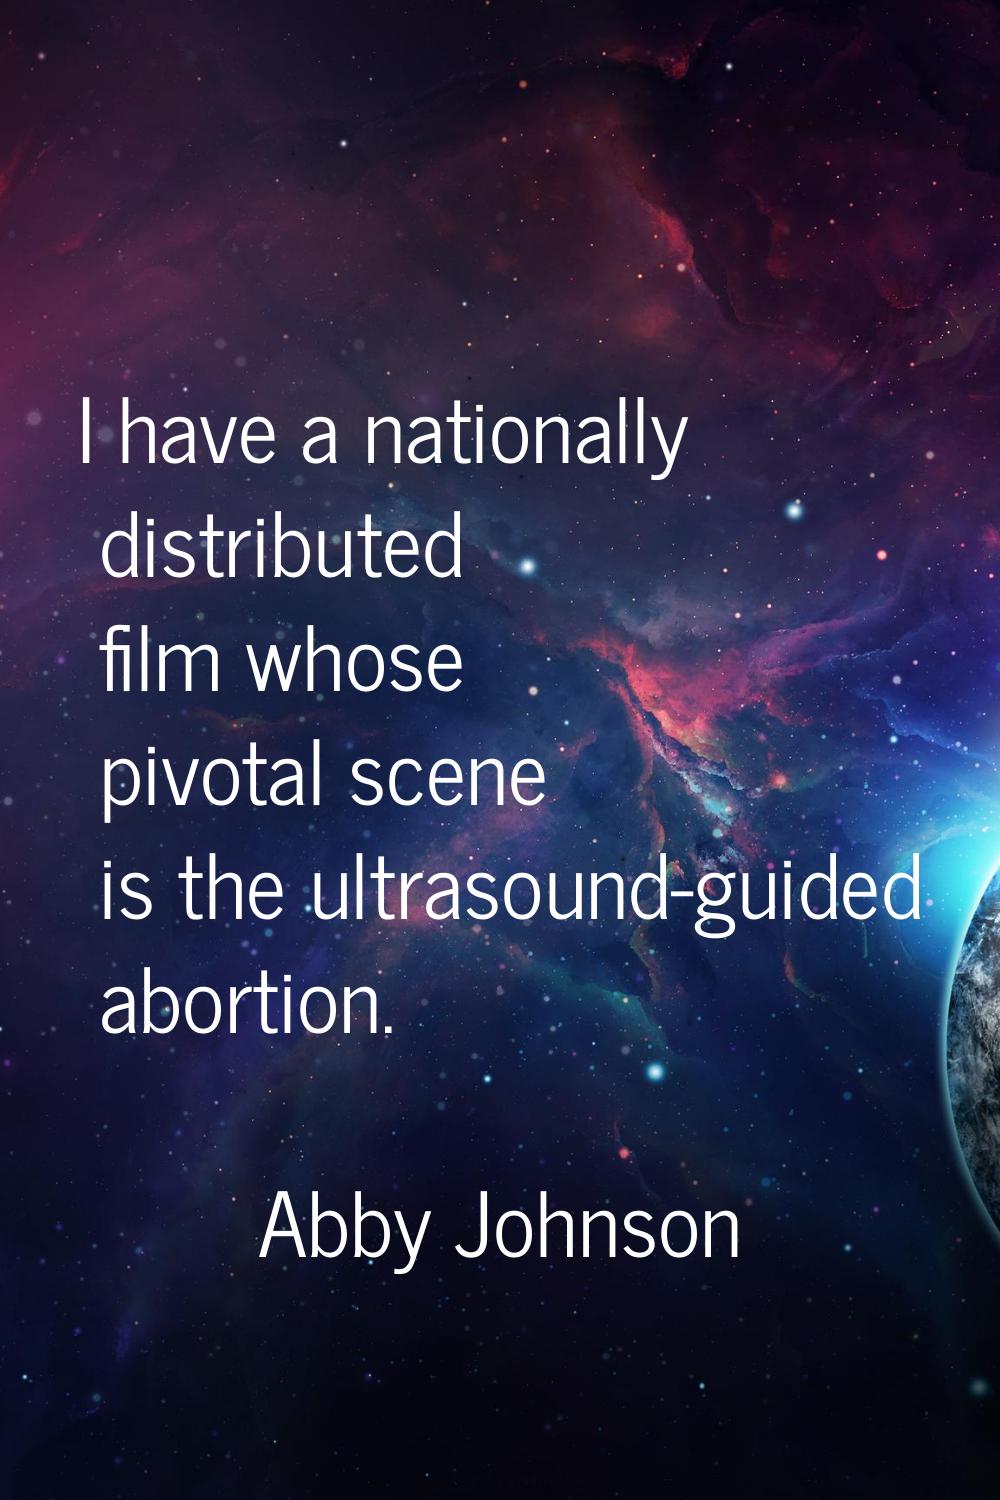 I have a nationally distributed film whose pivotal scene is the ultrasound-guided abortion.